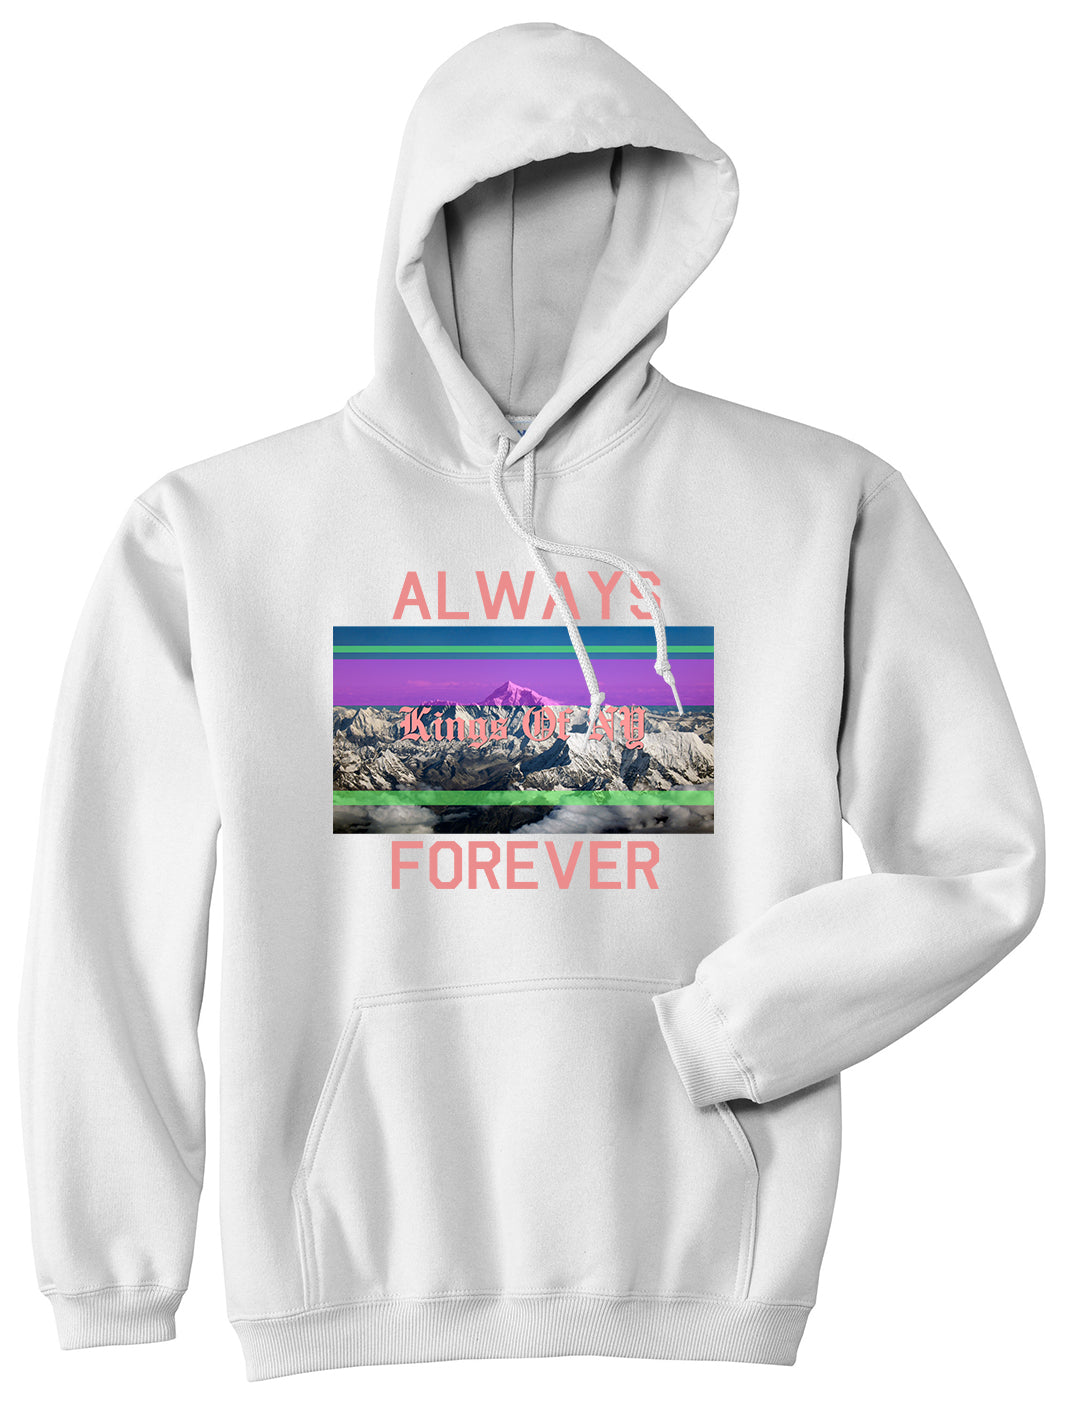 Mountains Always And Forever Mens Pullover Hoodie White by Kings Of NY